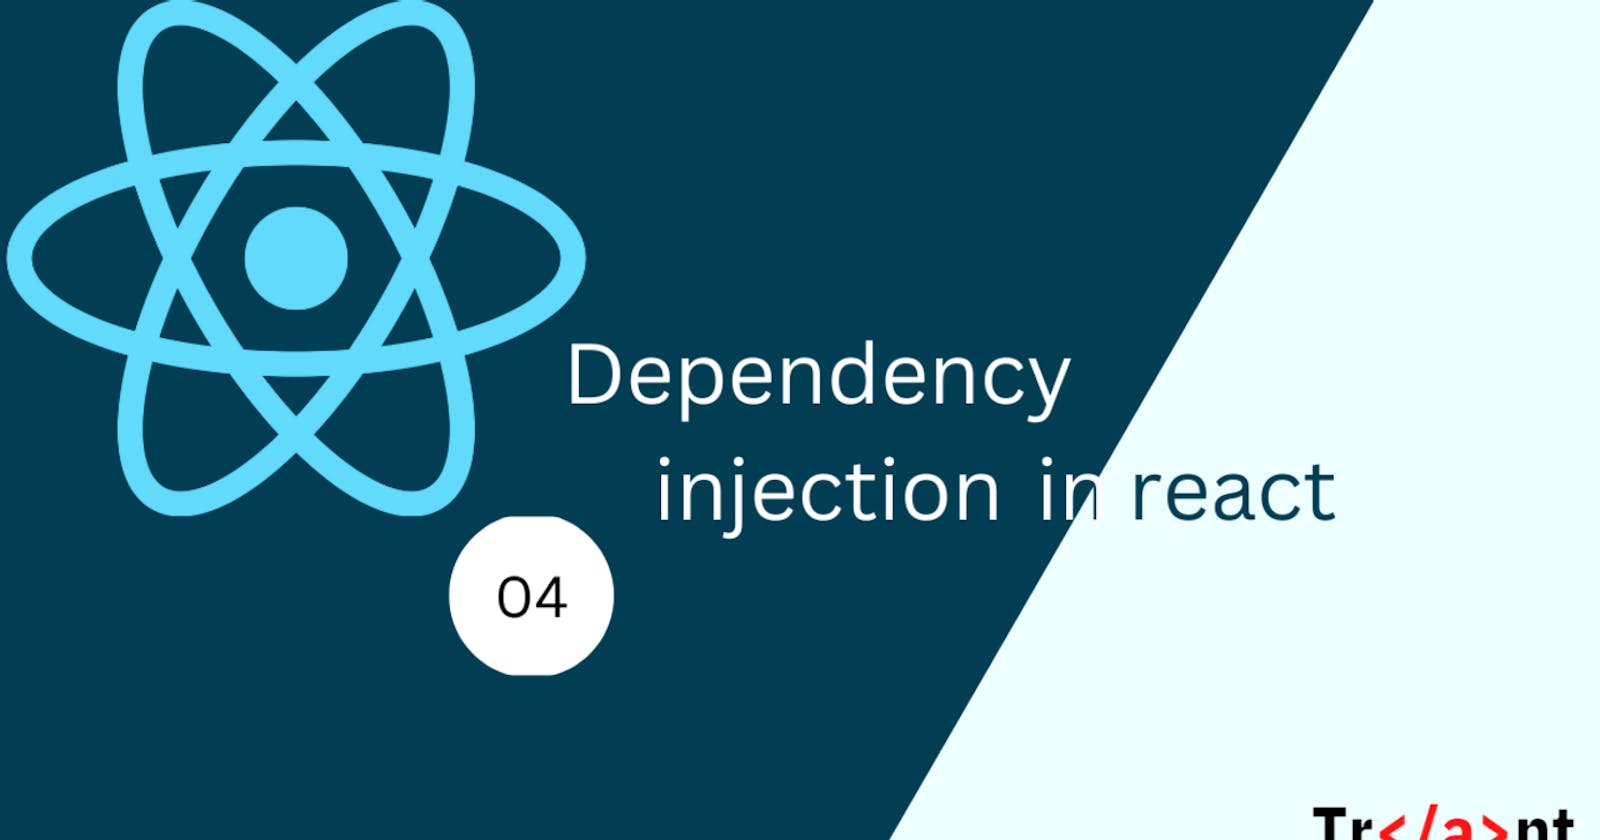 Dependency Injection in react